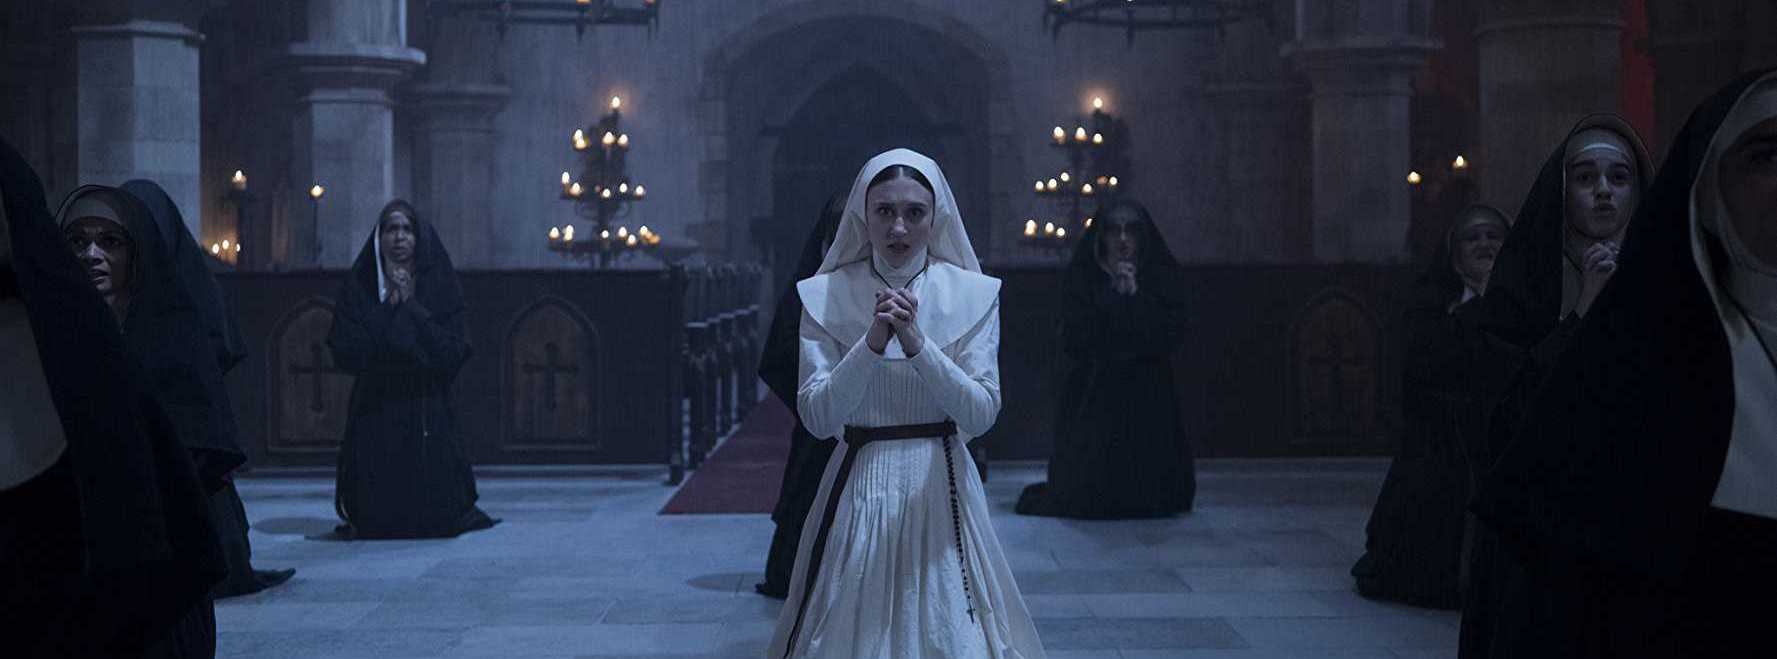 The Nun Movie Reviews and Ratings